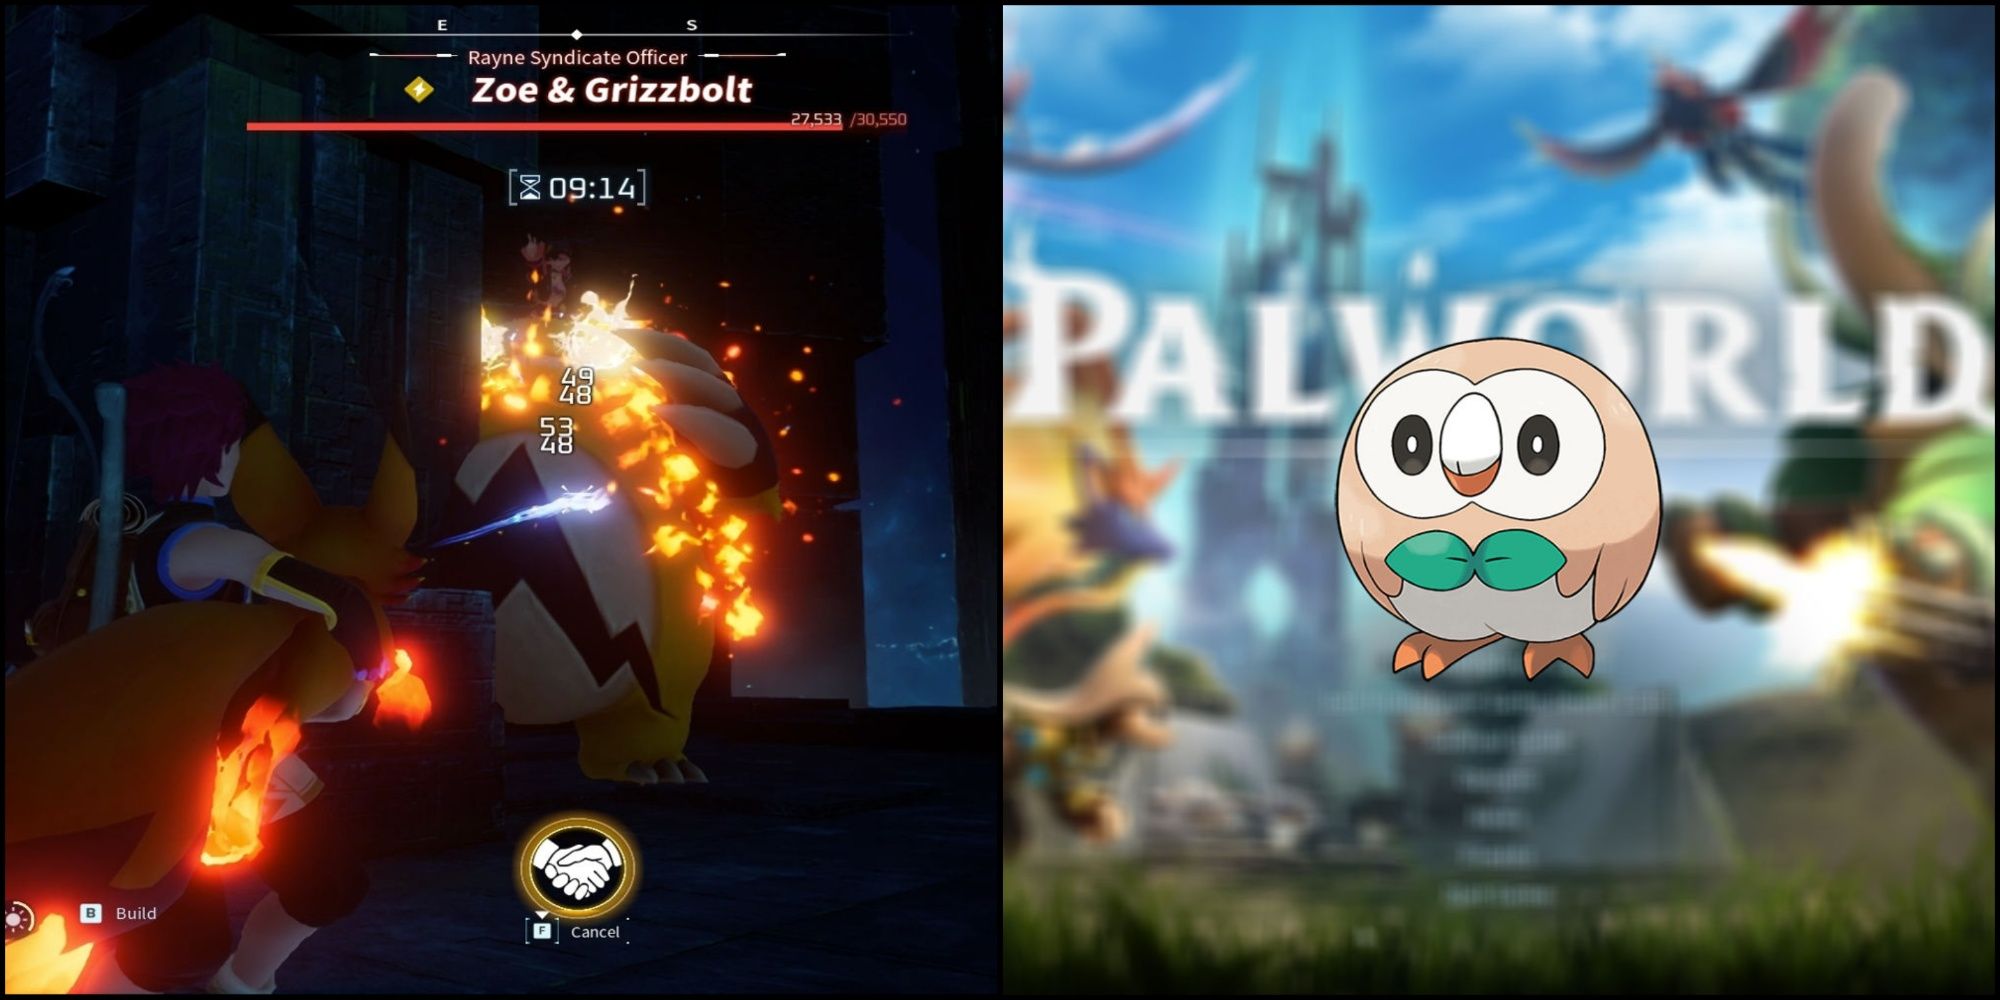 Fighting a boss in Palworld and Rowlet from Pokemon